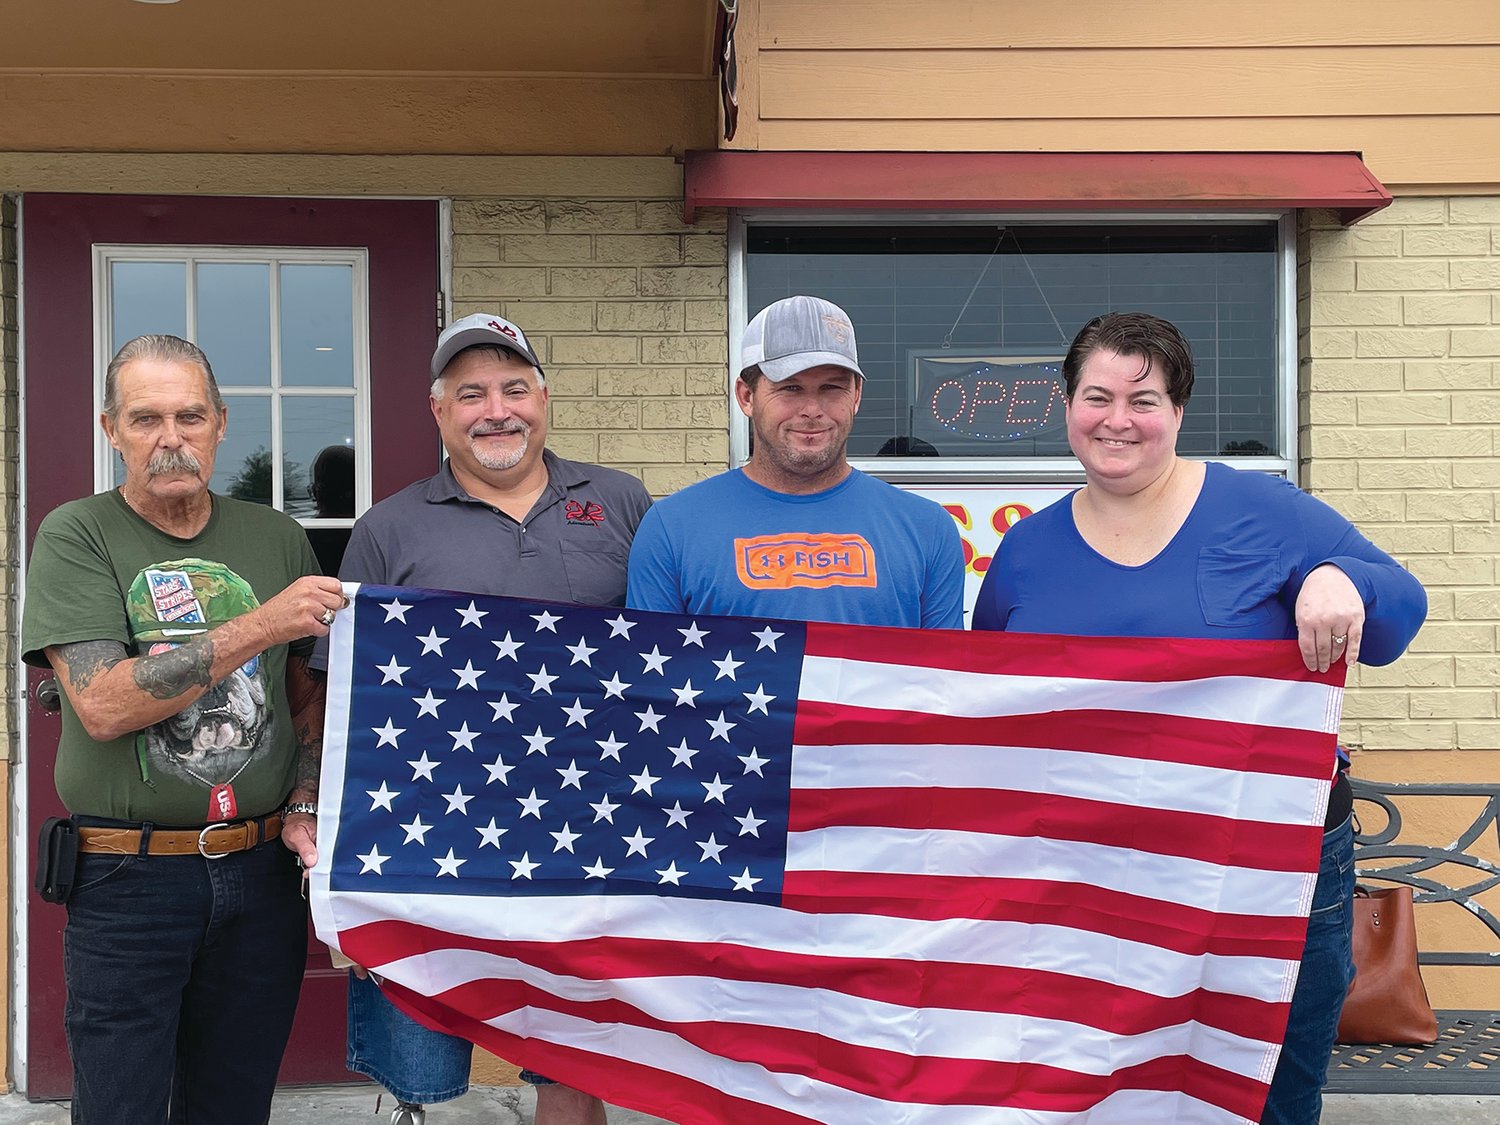 OKEECHOBEE – Jonica Hough (right), owner of Ultimate Flags Inc. donated flags to veterans Ronnie Rhoads, Steve Cone, Gregg Maynard (left to right) and several others not pictured. “Thank you for your service,” said Jonica and Glenn Hough. “It was the least we could do for those who served.”